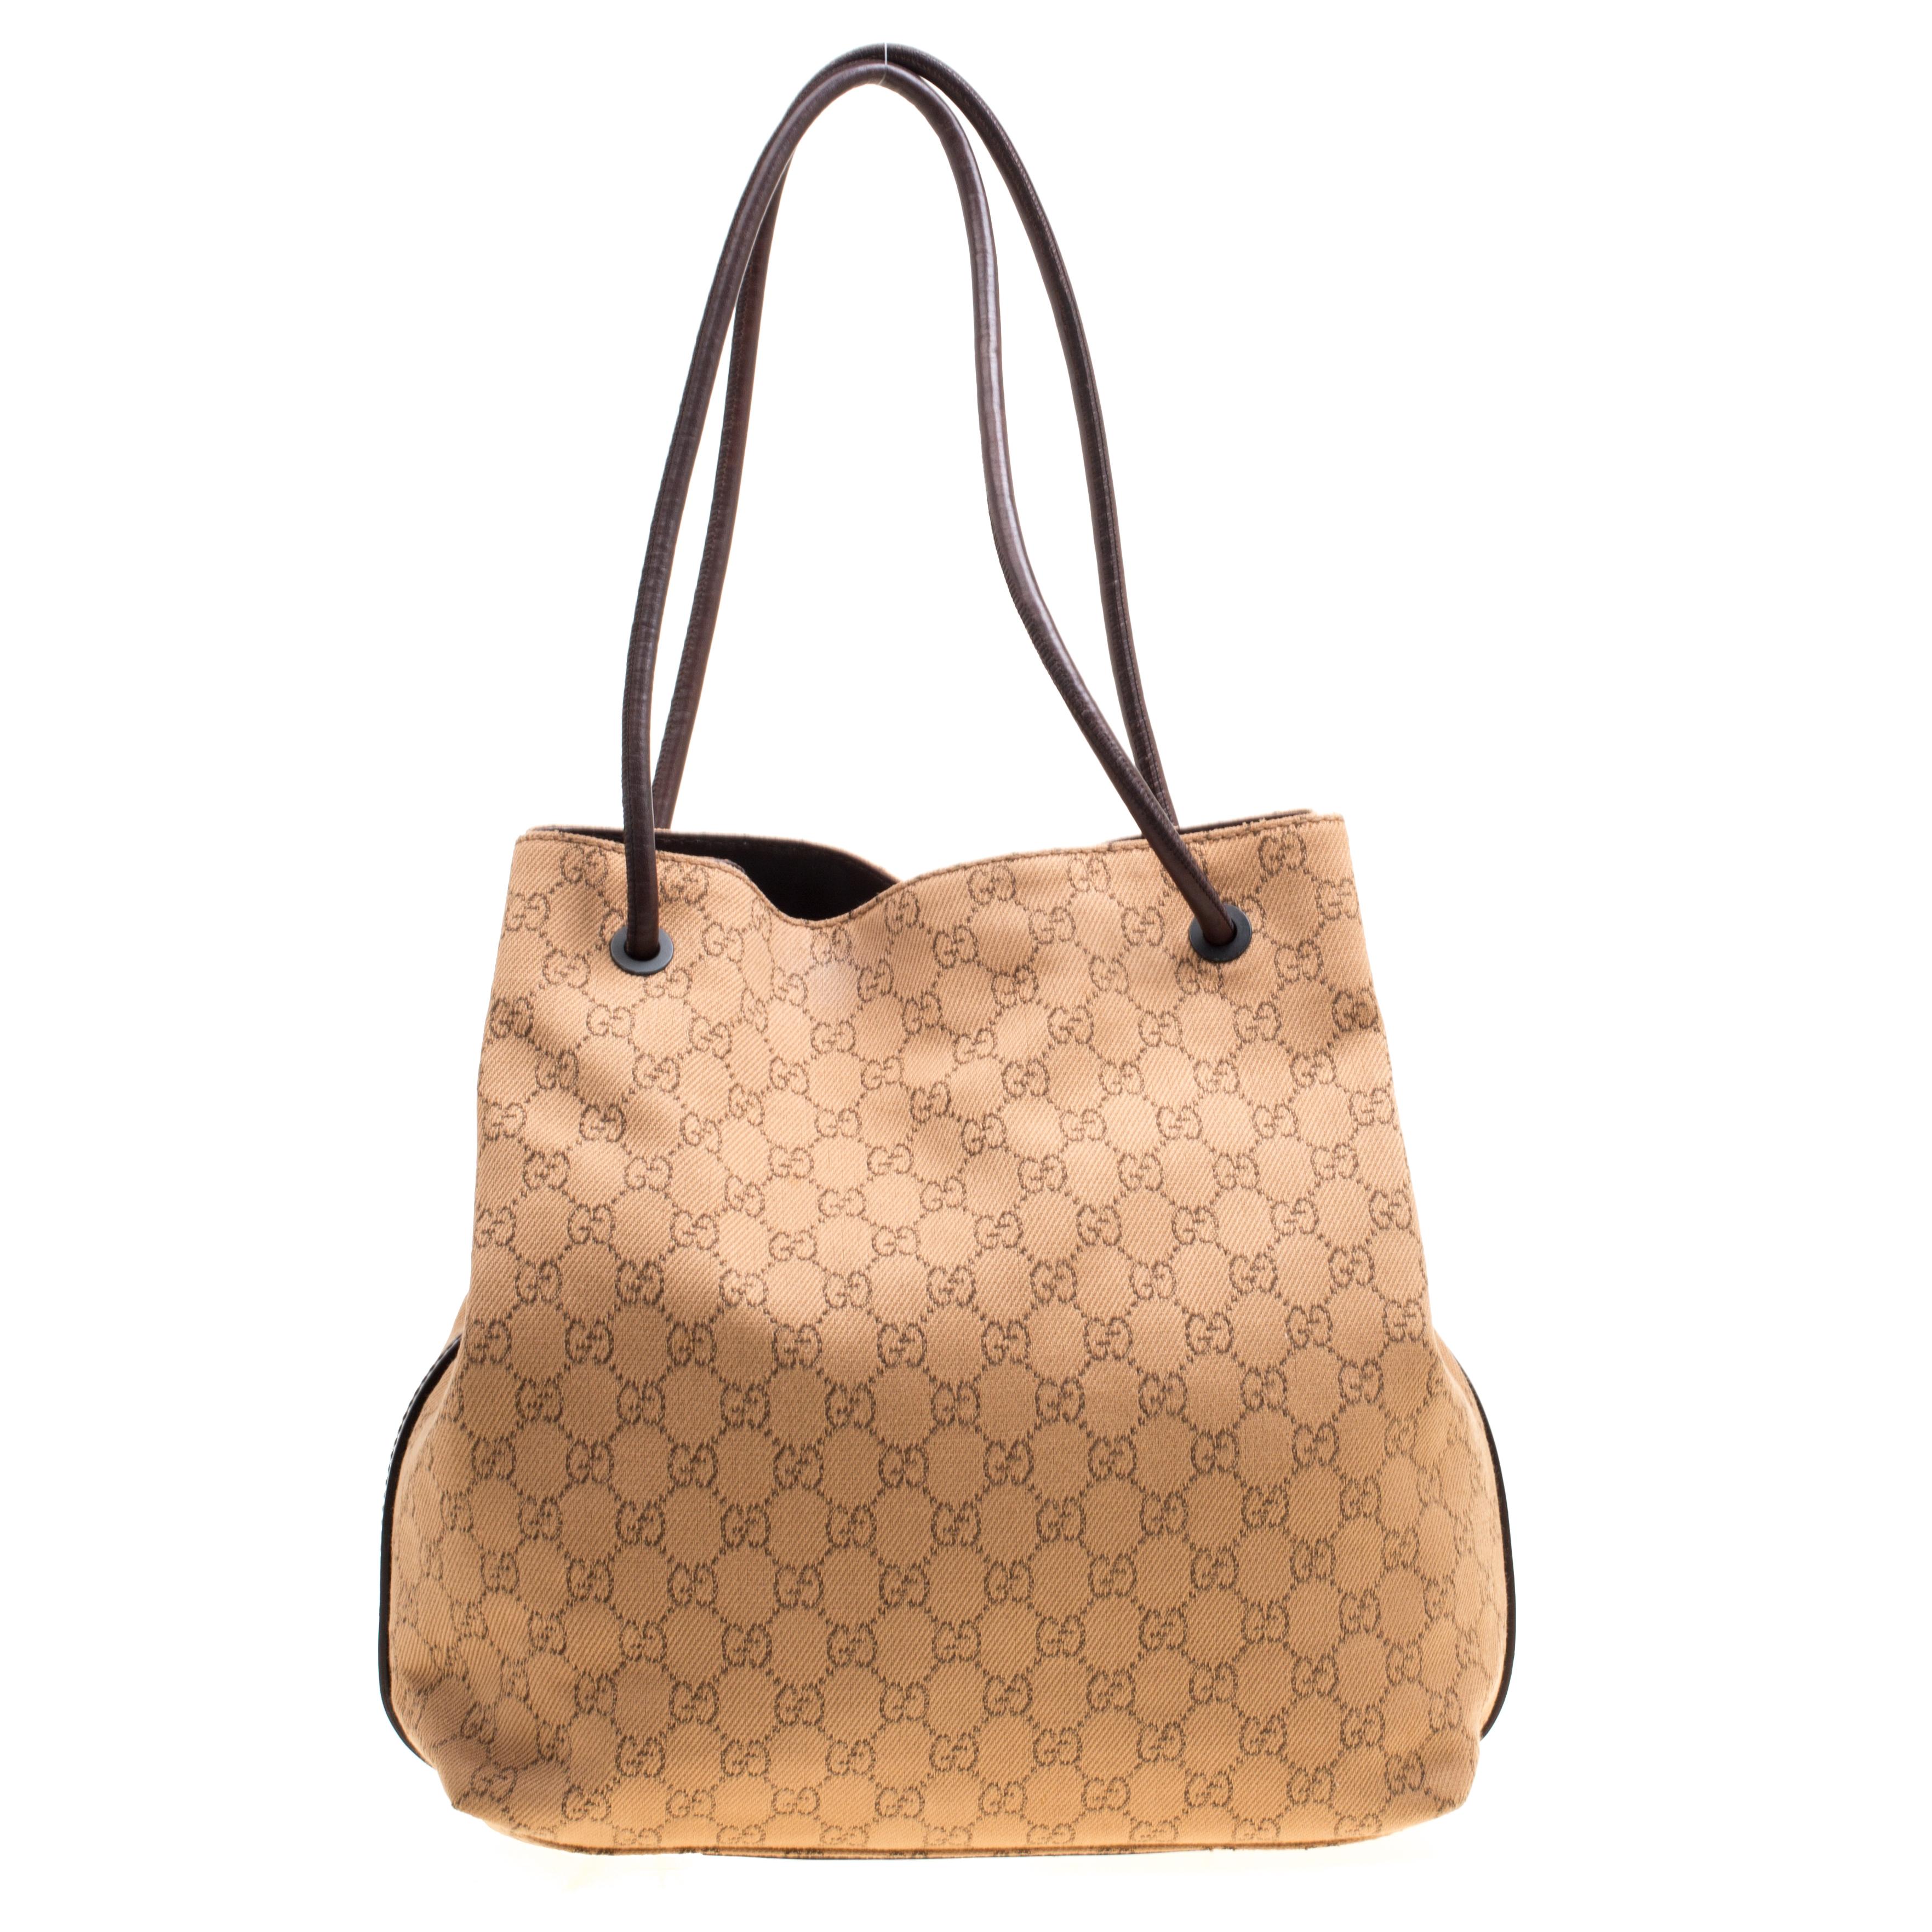 This unique Gucci tote is great for daily use. Crafted from monogram Gucci canvas along with leather trims, this bag is accented with leather handles that are attached to the bag with leather eyelets. Its interior is lined with brown fabric and